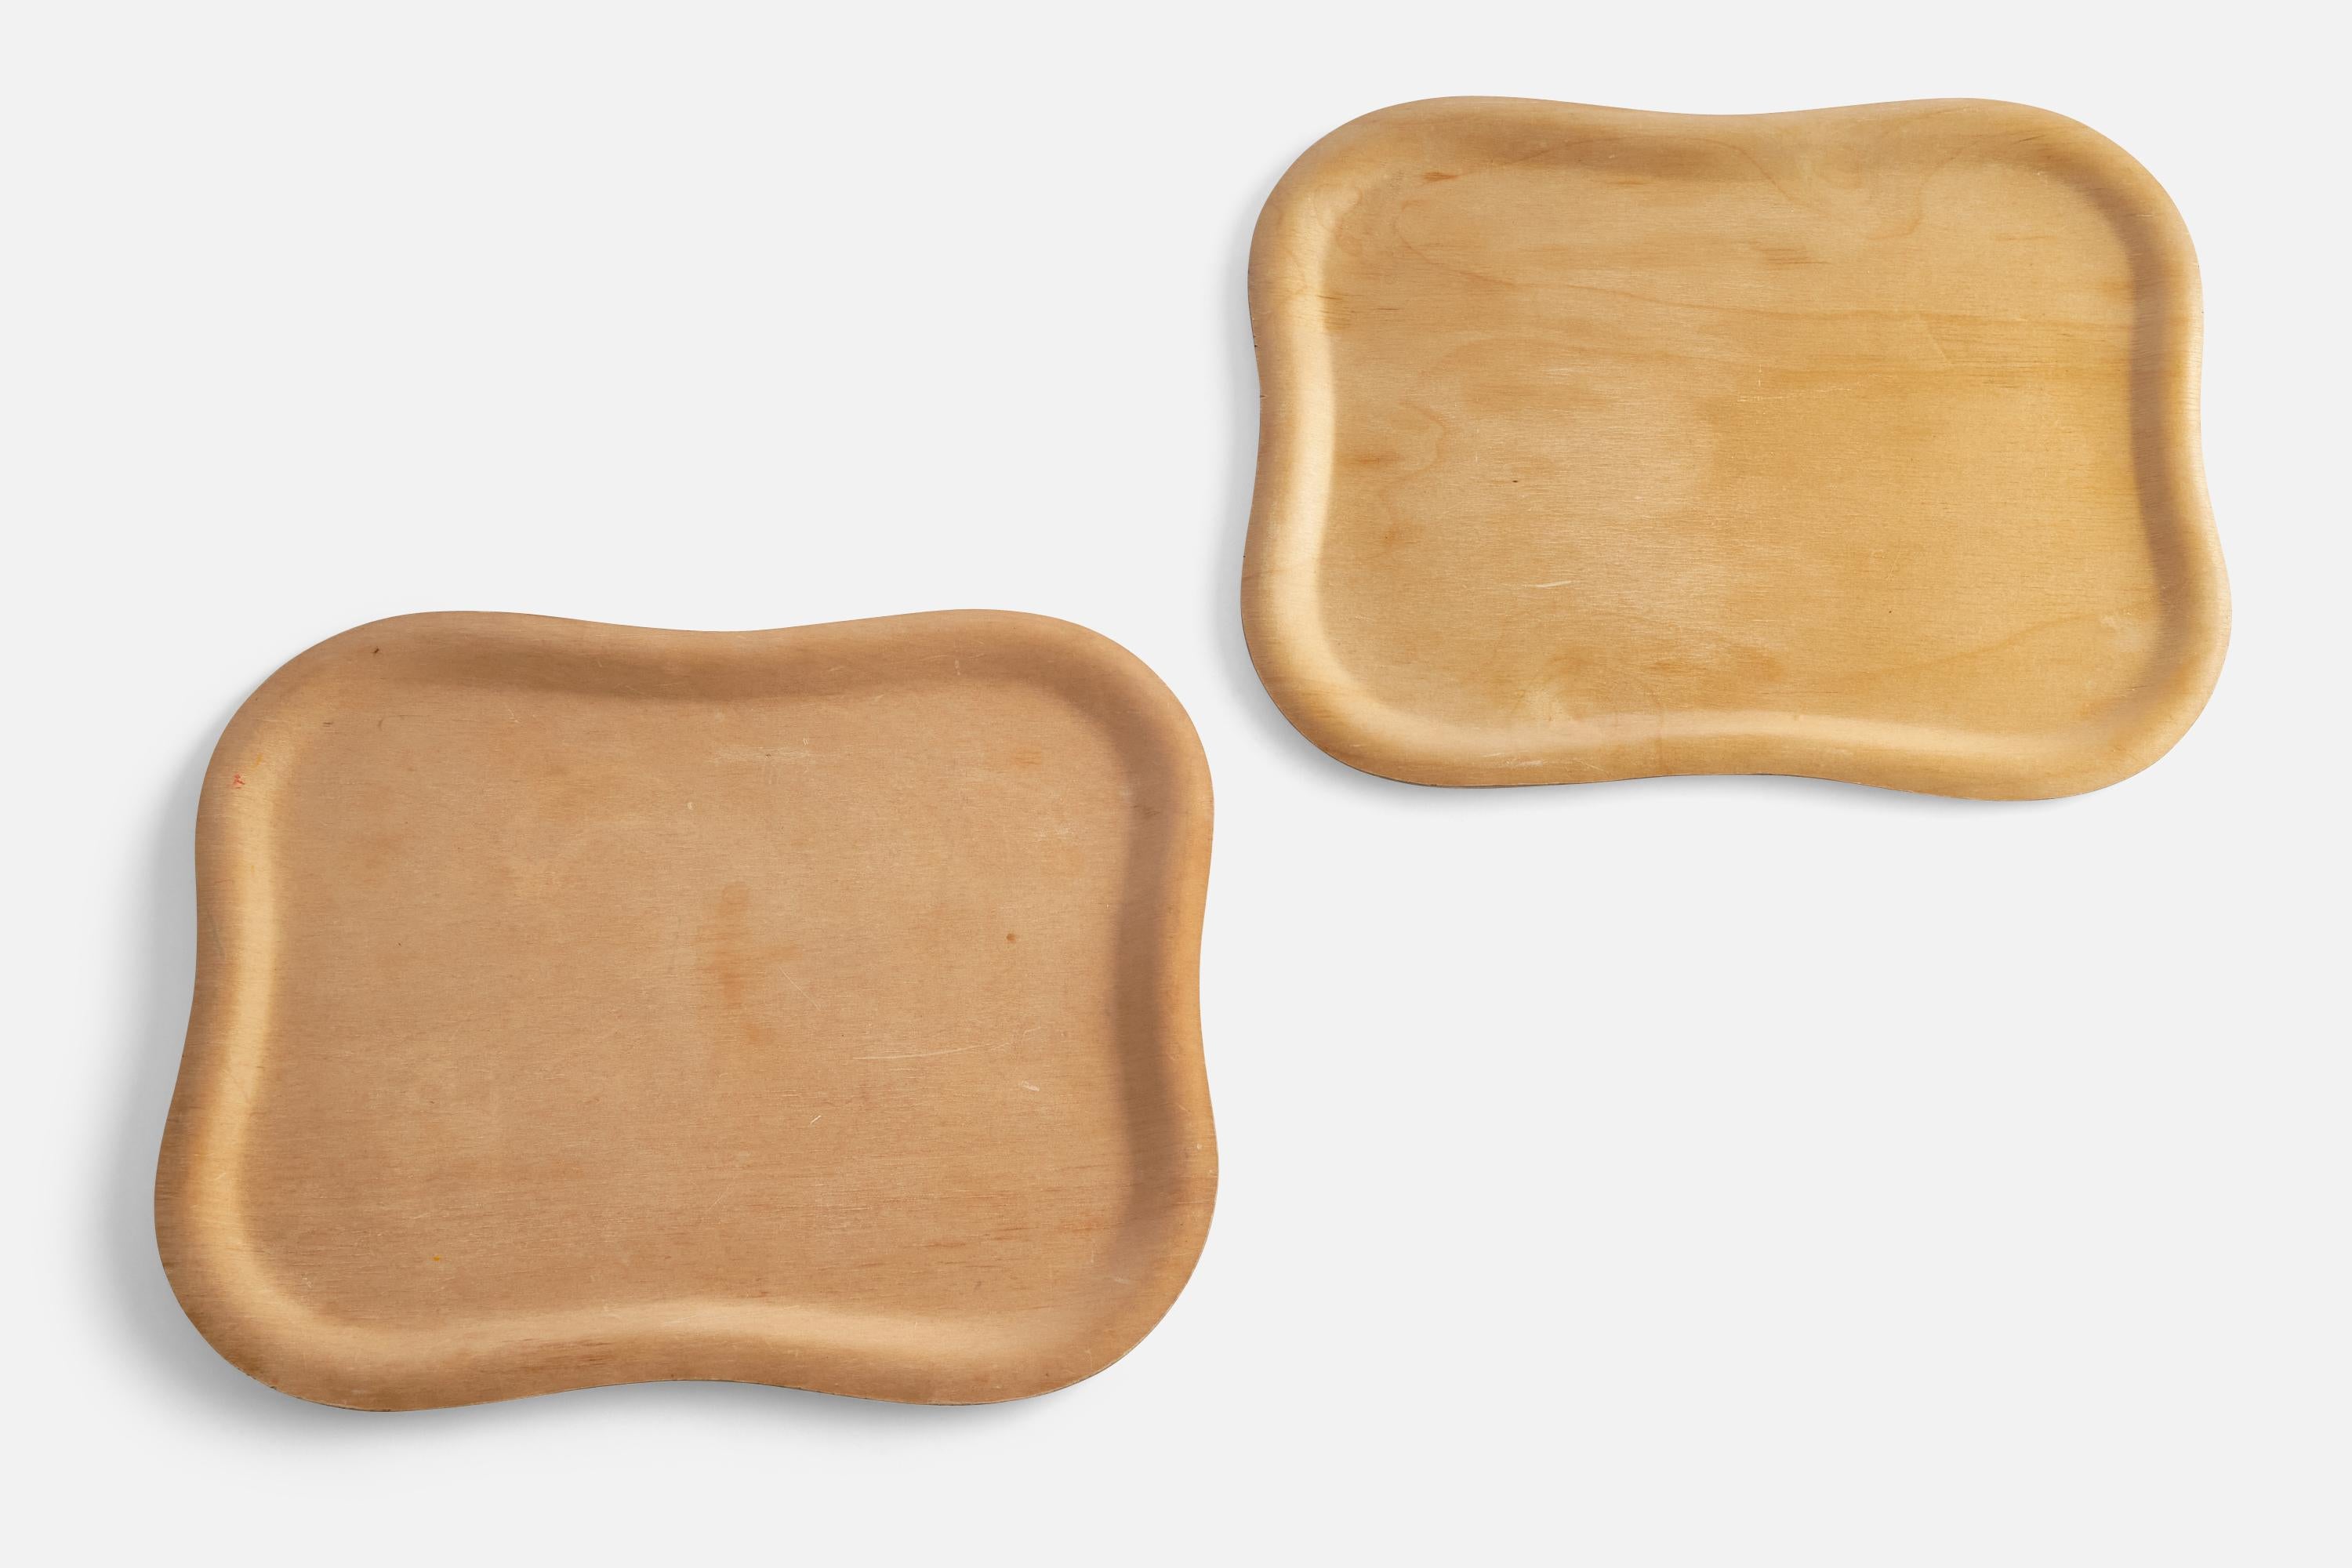 A pair of birch plywood trays designed by Tapio Wirkkala and produced by Soinne & Knioy, Finland, 1950s